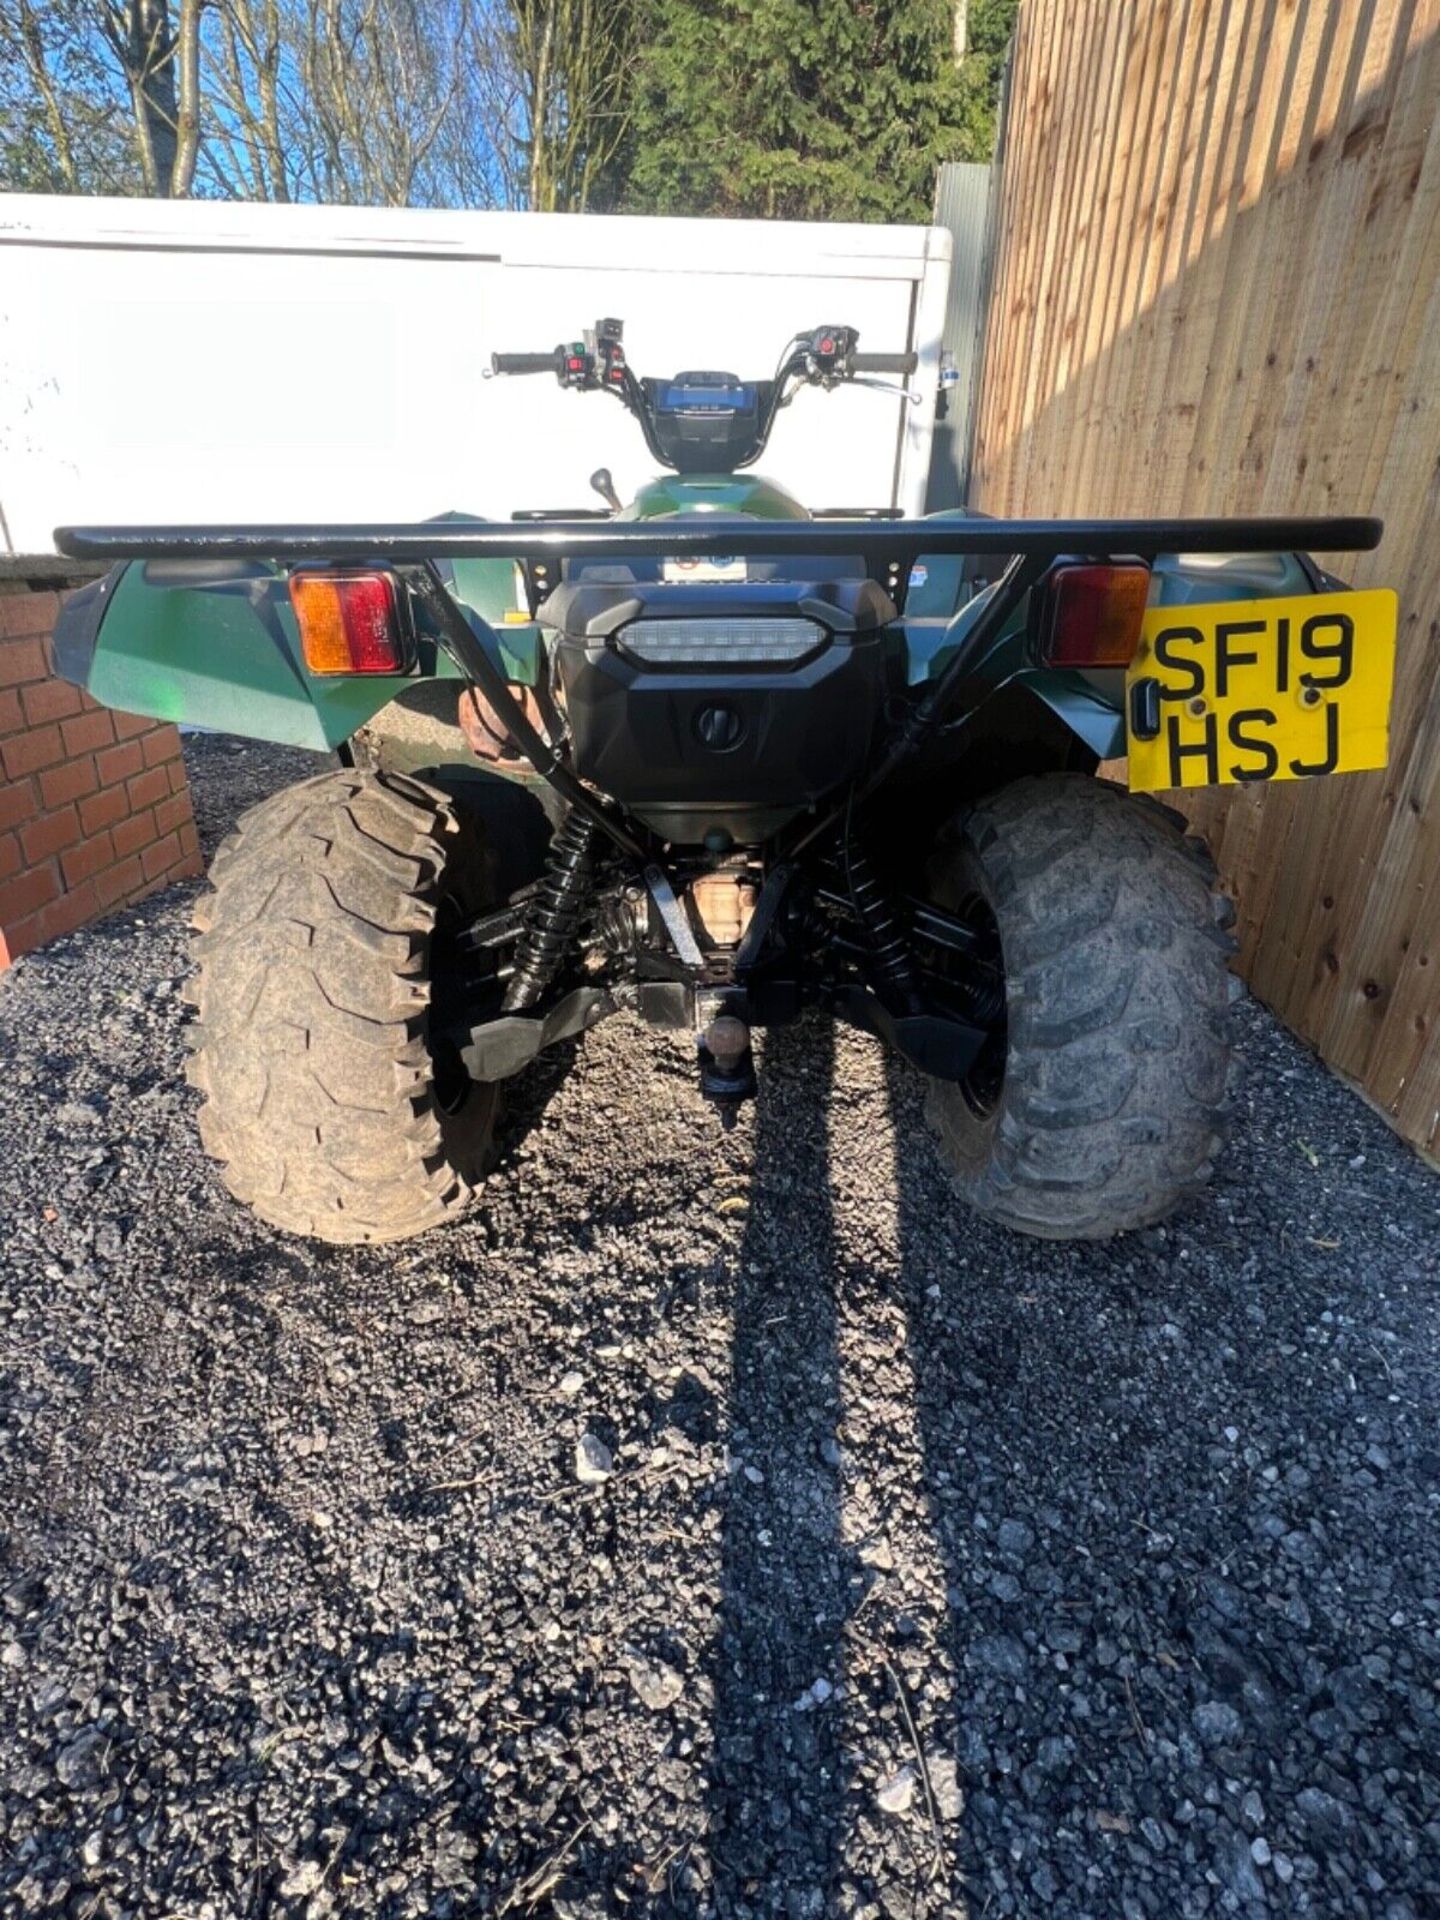 YAMAHA GRIZZLY 700 1300 HOURS FROM NEW 4X4 ROAD LEGAL FARM QUAD BIKE ATV - Image 9 of 13